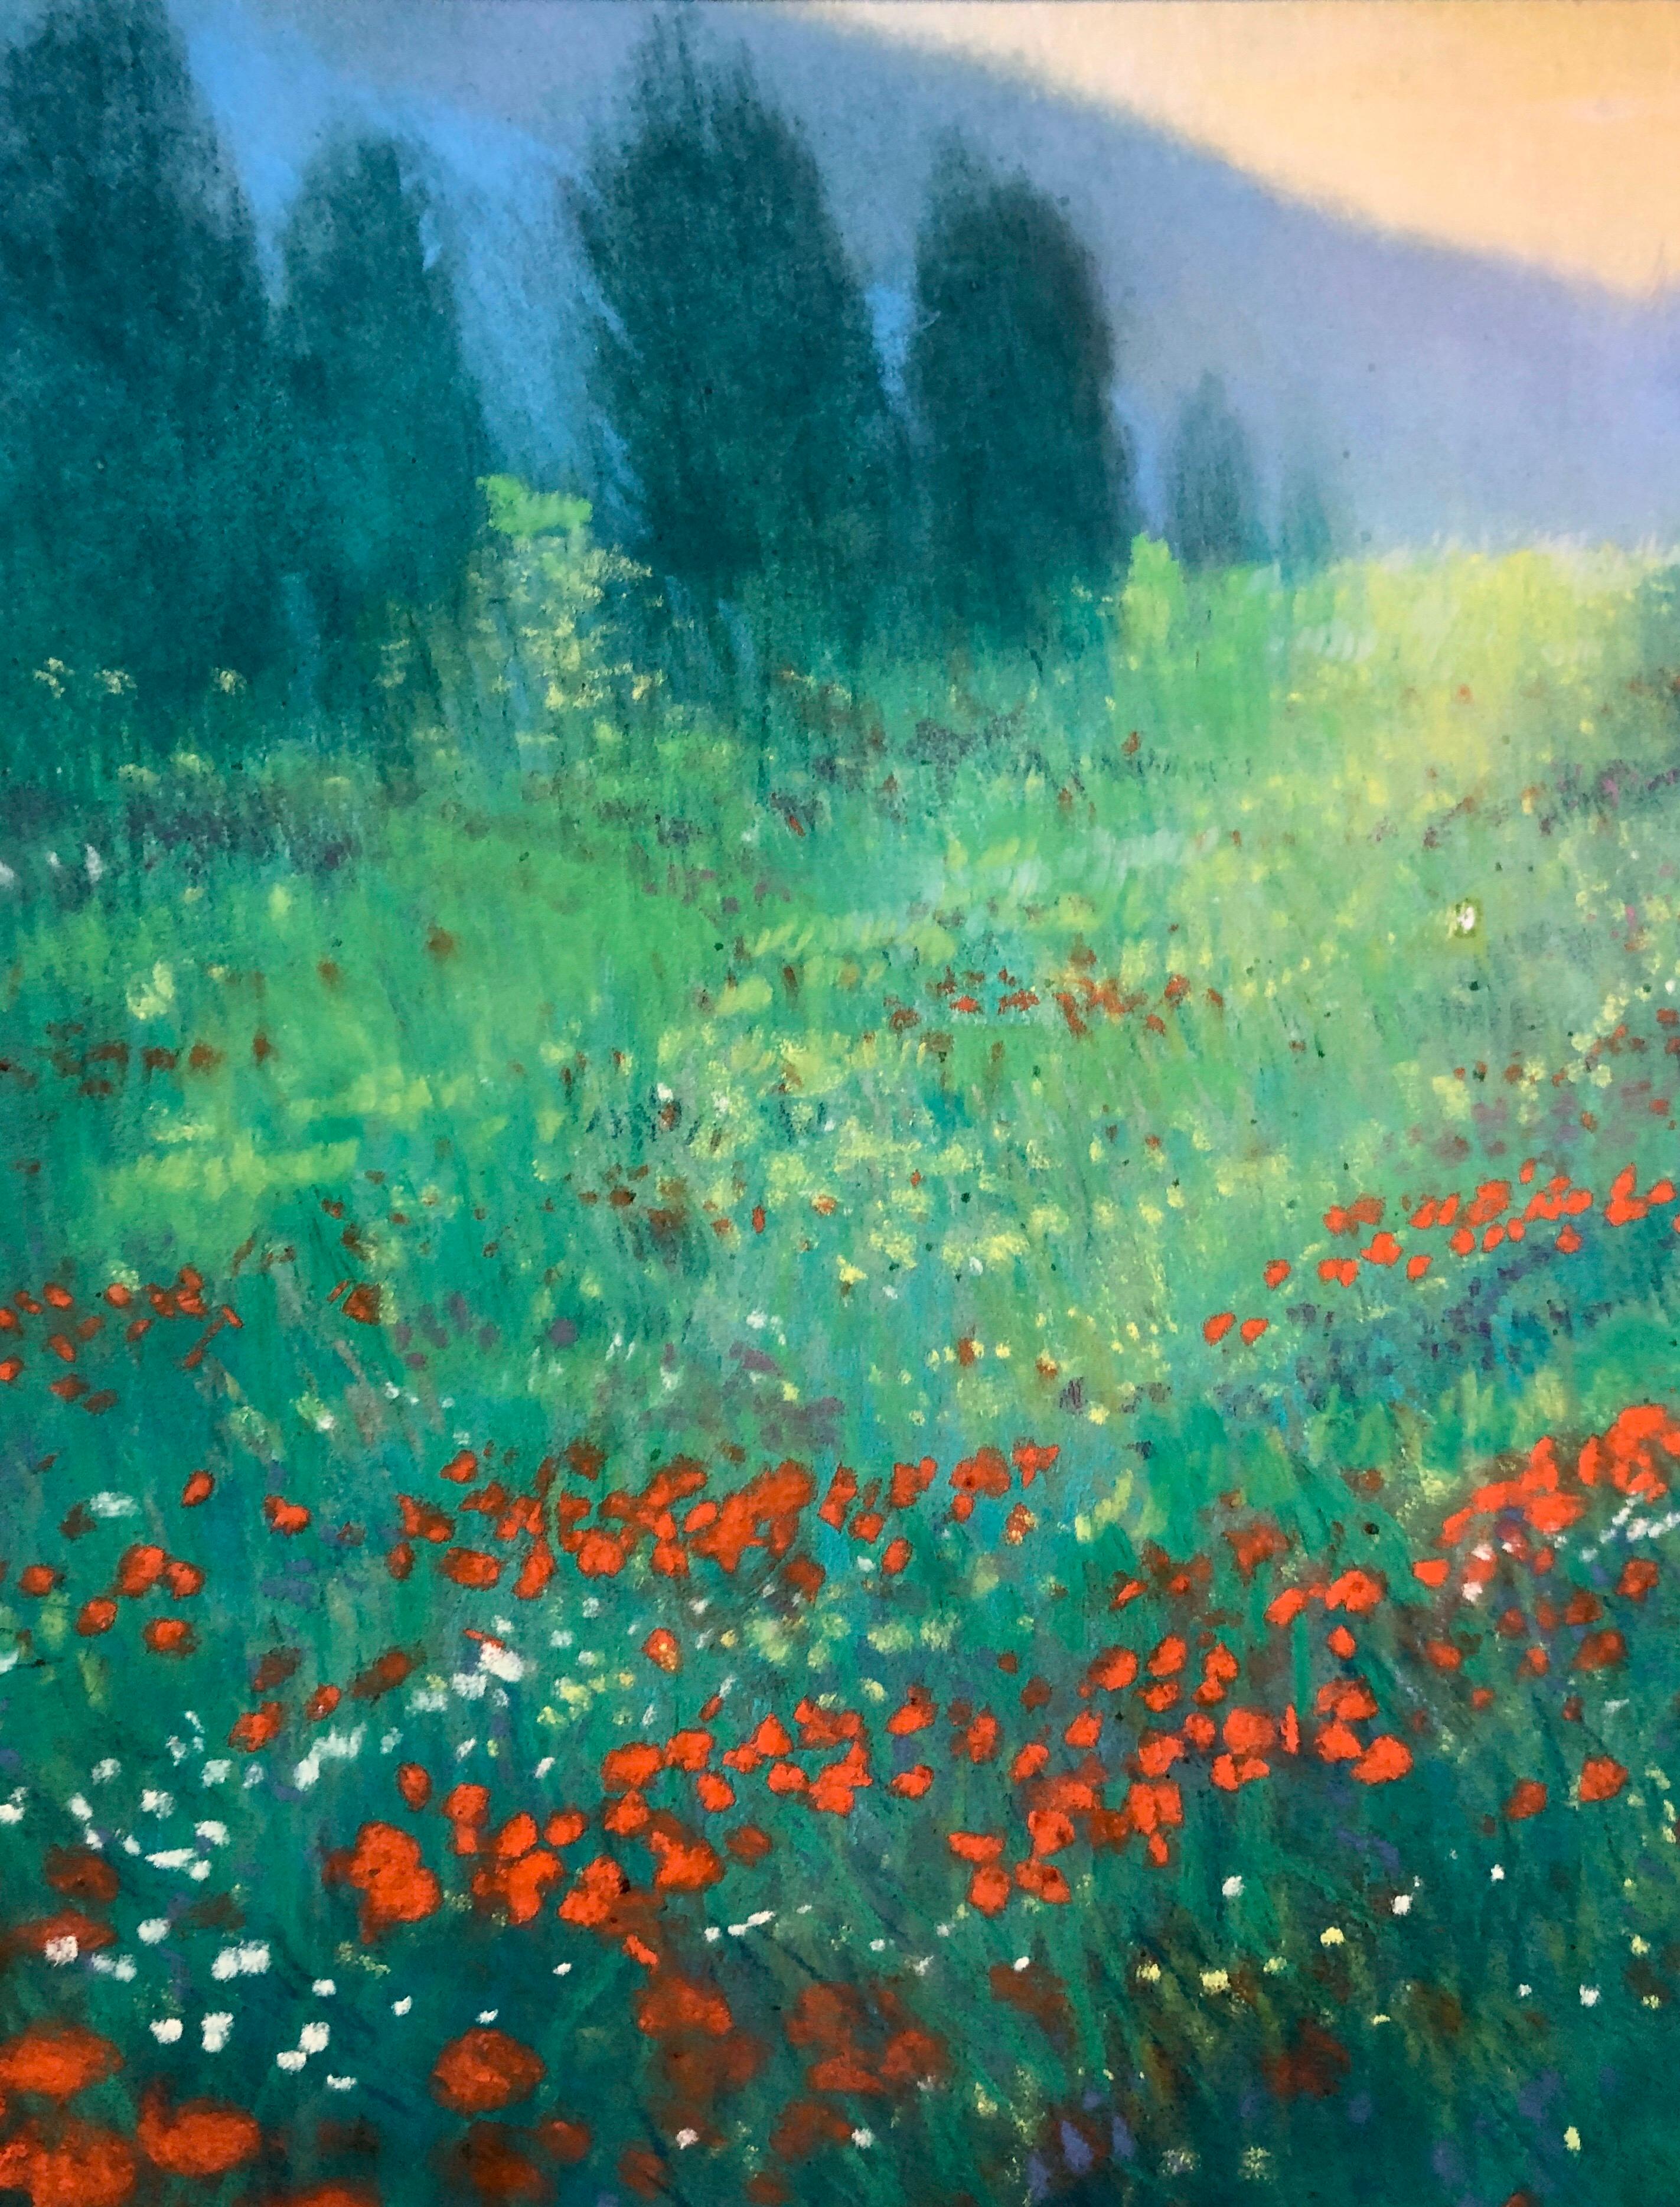 German Contemporary Pastel Painting Radiant Landscape Field with Flowers Poppies - Blue Landscape Painting by Kuno Vollet